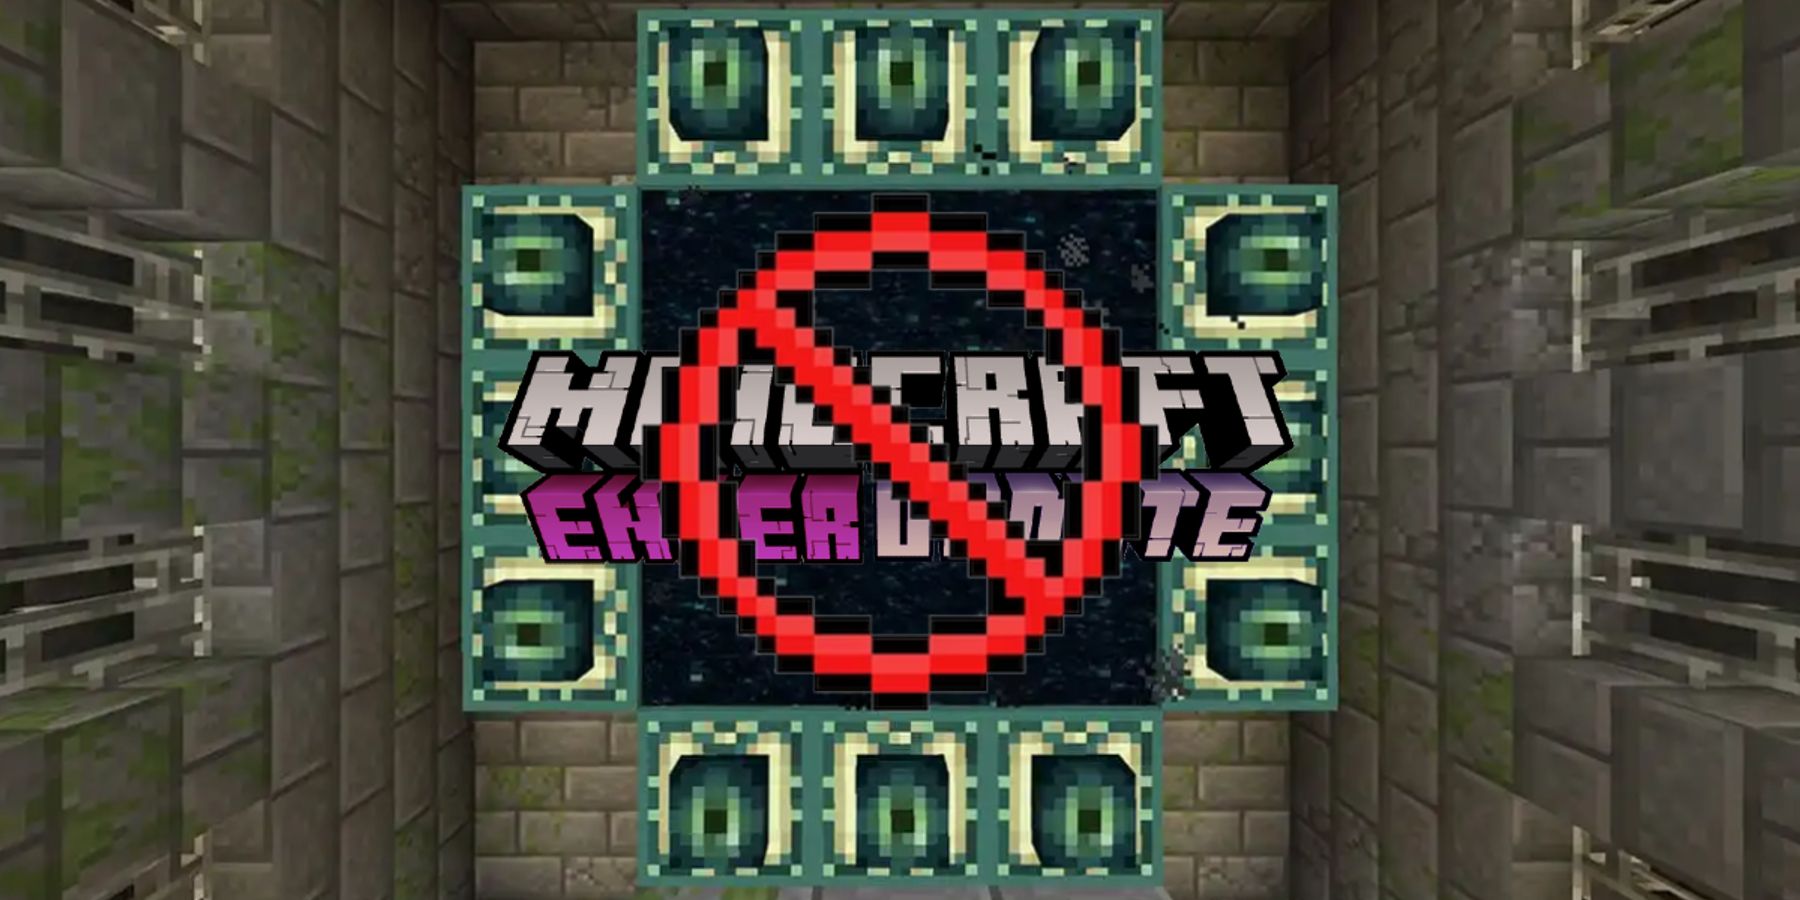 Minecraft The End Update - What should you expect?